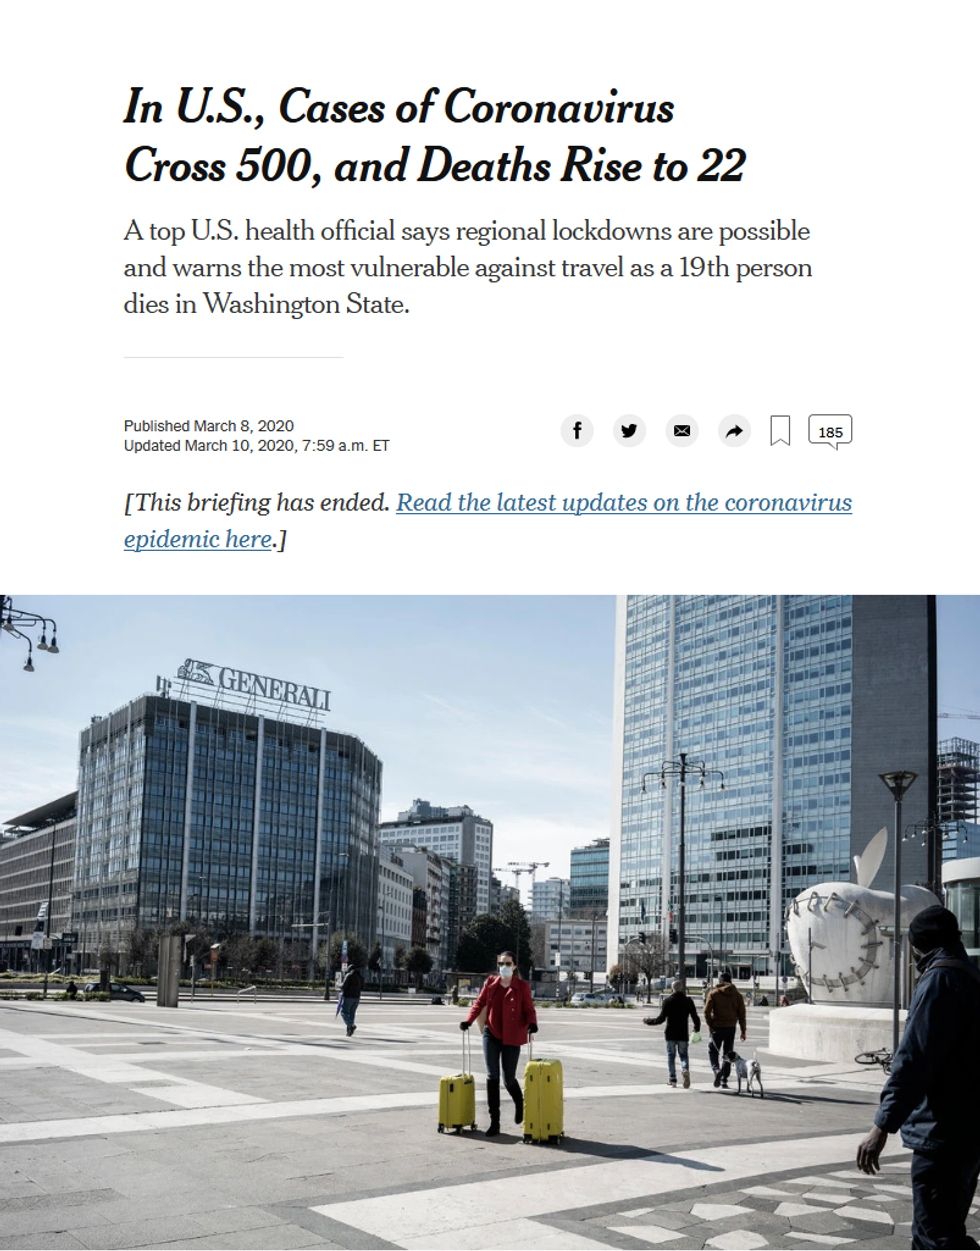 NYT: In U.S., Cases of Coronavirus Cross 500, and Deaths Rise to 22